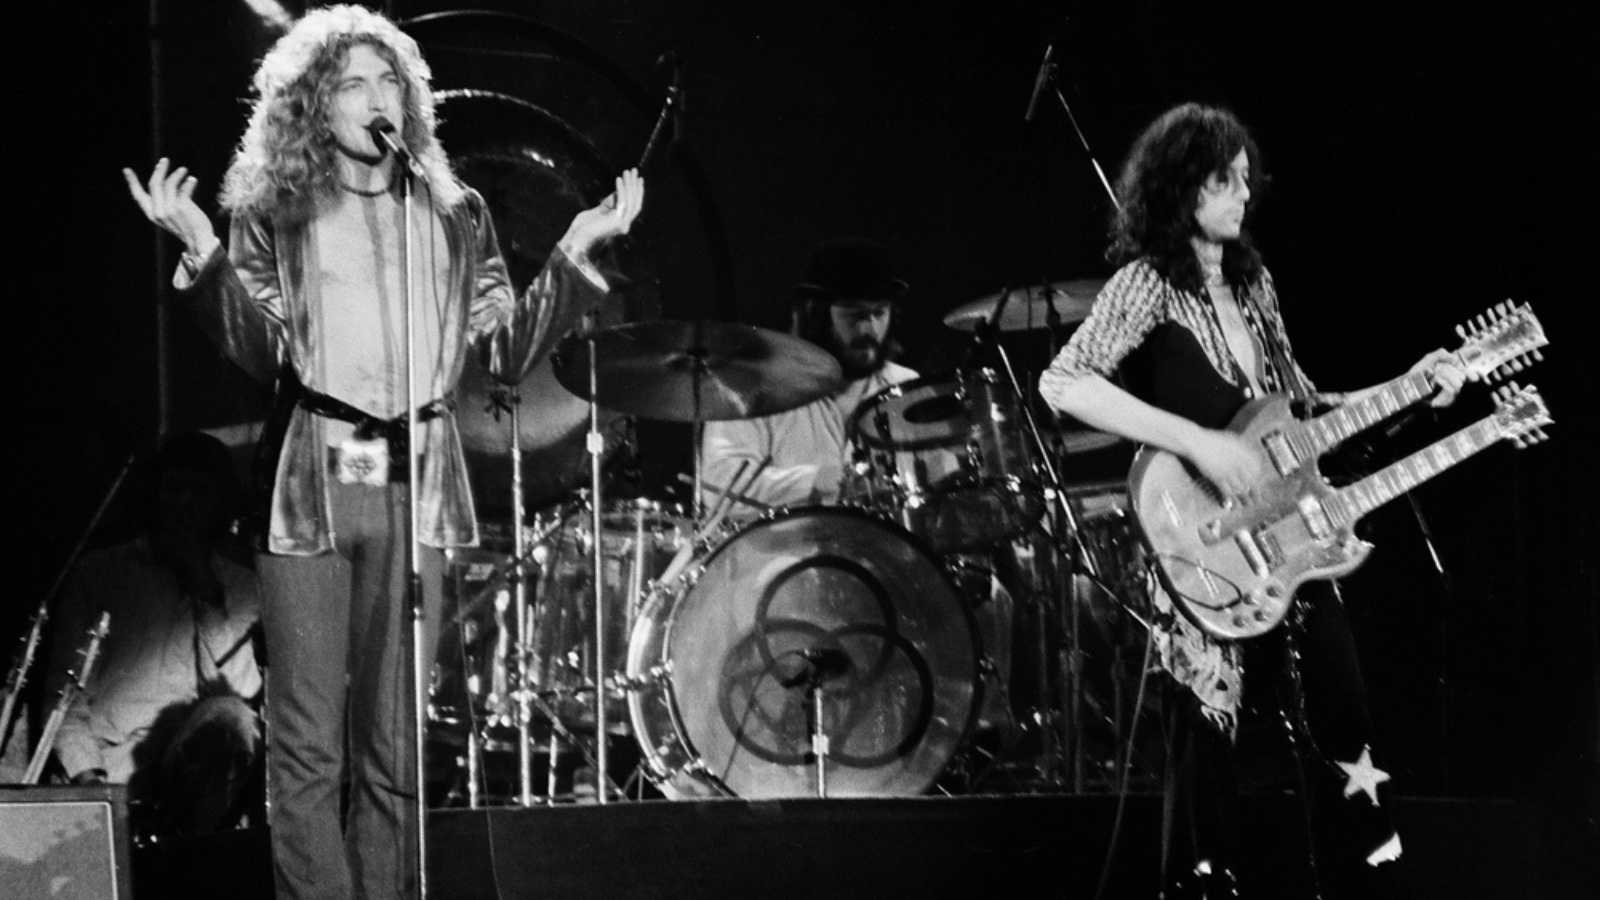 Uniondale, NY / USA - February 13, 1975: Robert Plant and Jimmy Page of legendary rock band Led Zeppelin perform at Nassau Coliseum on their 1975 North American tour.